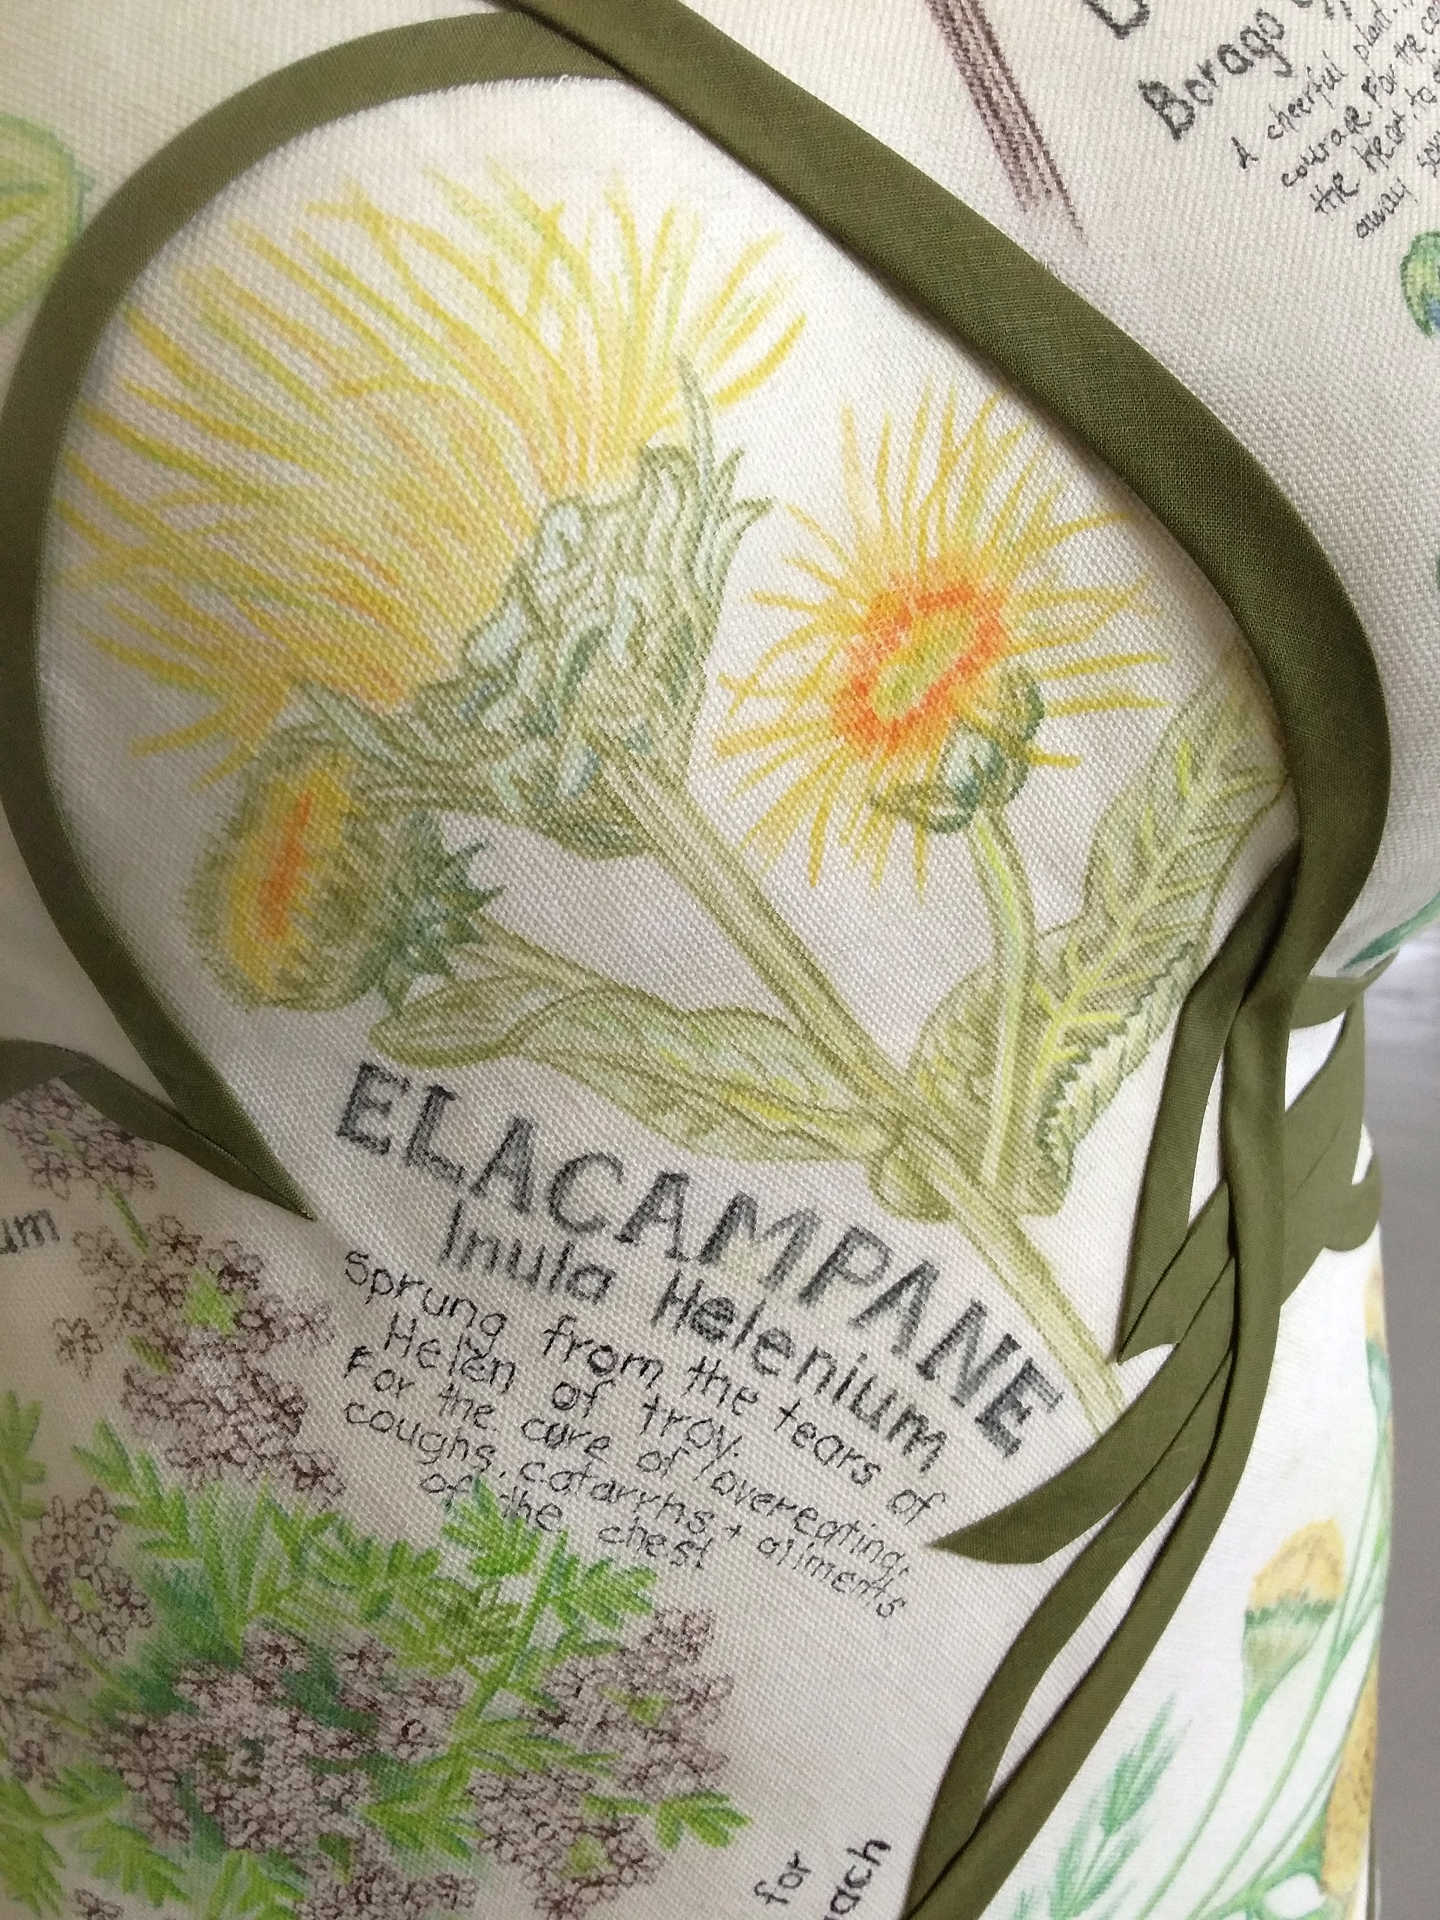 A close-up detail shot of 'Disempowerment' by Libby Bloxham, showing a white fabric panel covering the chest of a female torso mannequin. The panel is filled with pencil illustrations of botanical specimens. This photo focuses on a fluffy yellow flower with large leaves, and the text: 'Elacampane', 'Inula Helenium', 'Sprung from the tears of Hele of Troy. For the cure of overeating, coughs, catarrhs + ailments of the chest'.